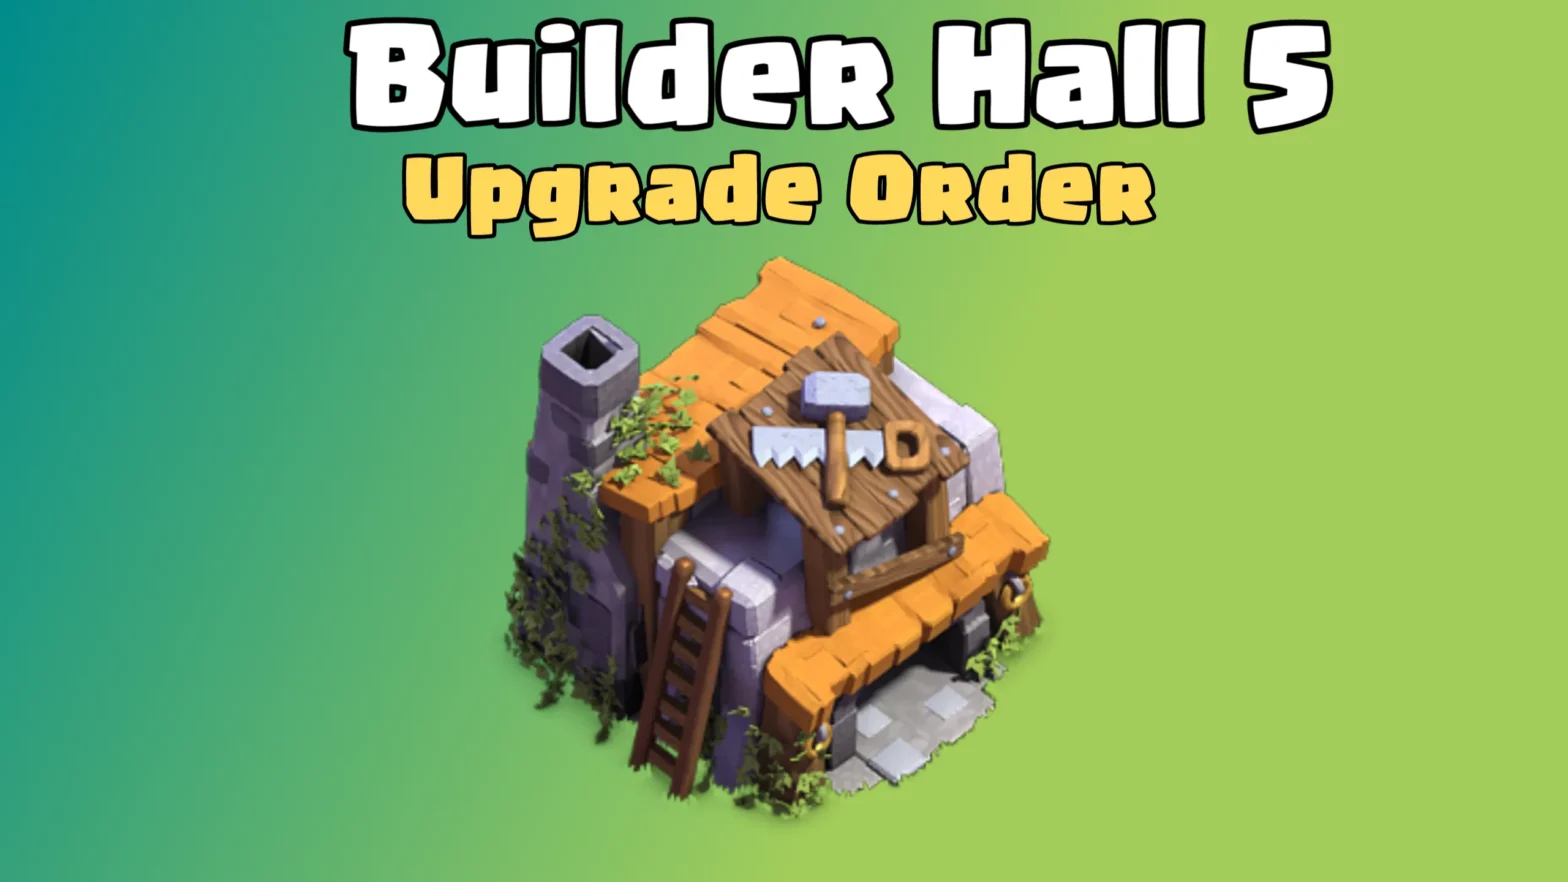 Clash of Clans: Builder Hall 5 Upgrade Order and Guide